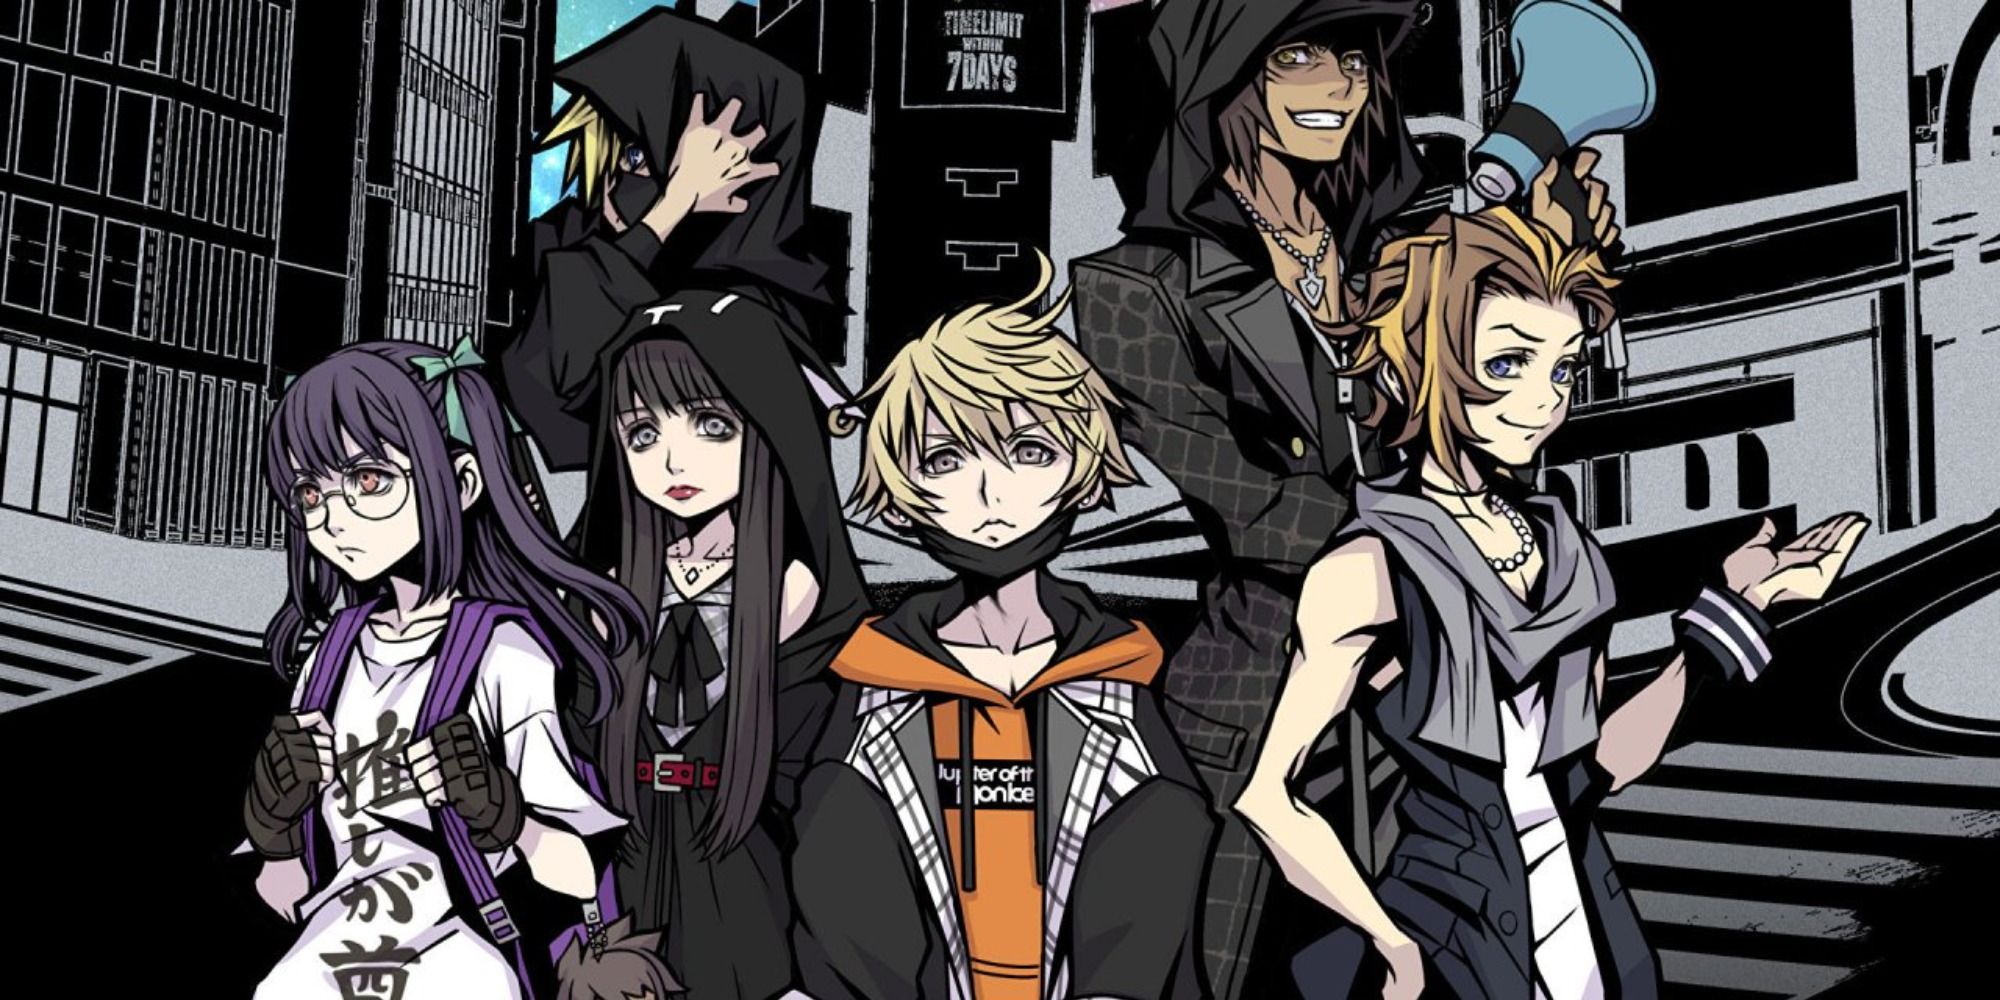 Neo The World Ends With You promo art showing cast